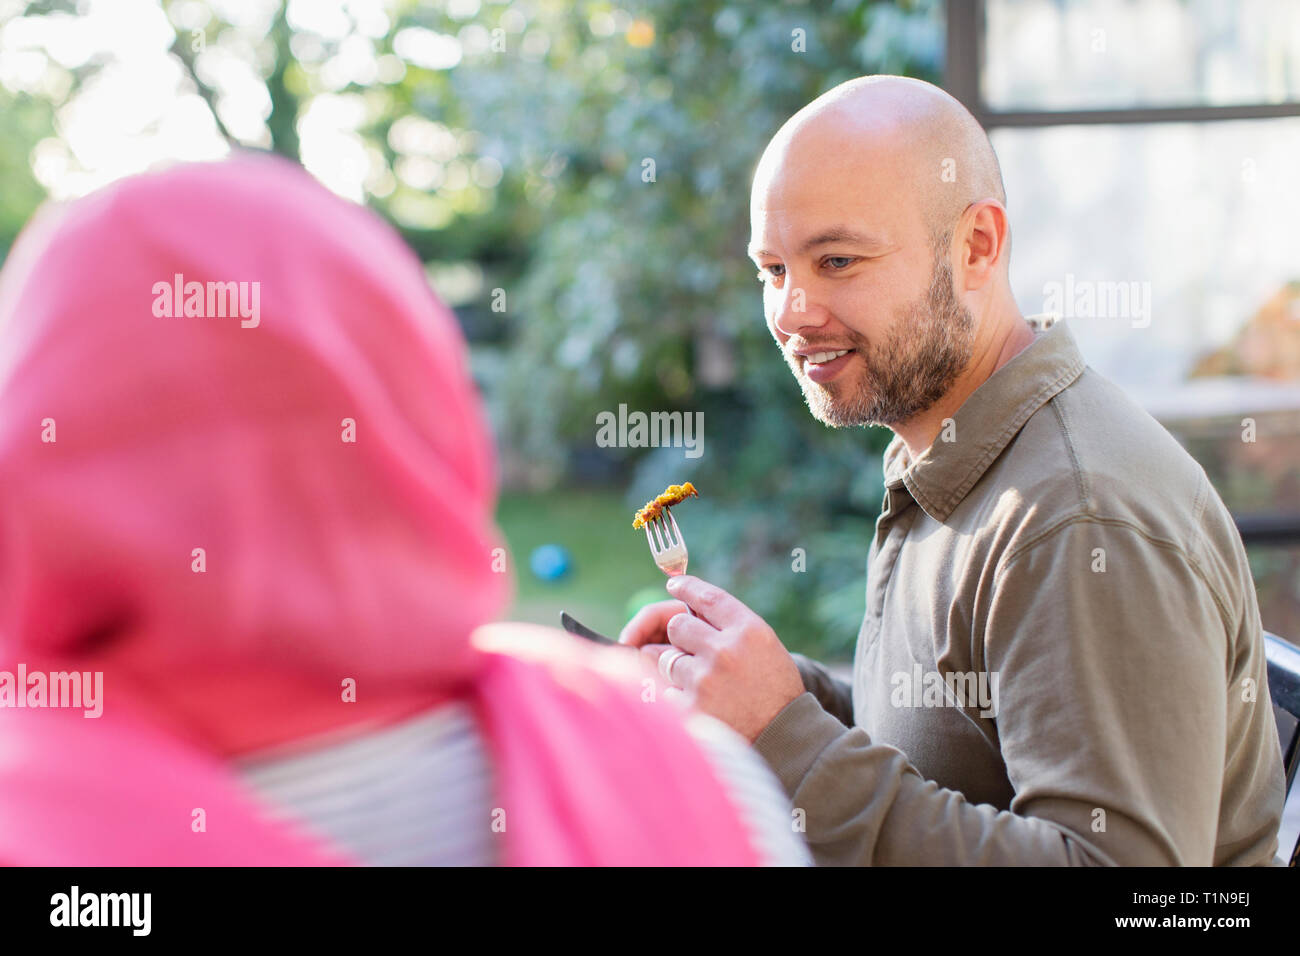 Man eating with wife in hijab Stock Photo